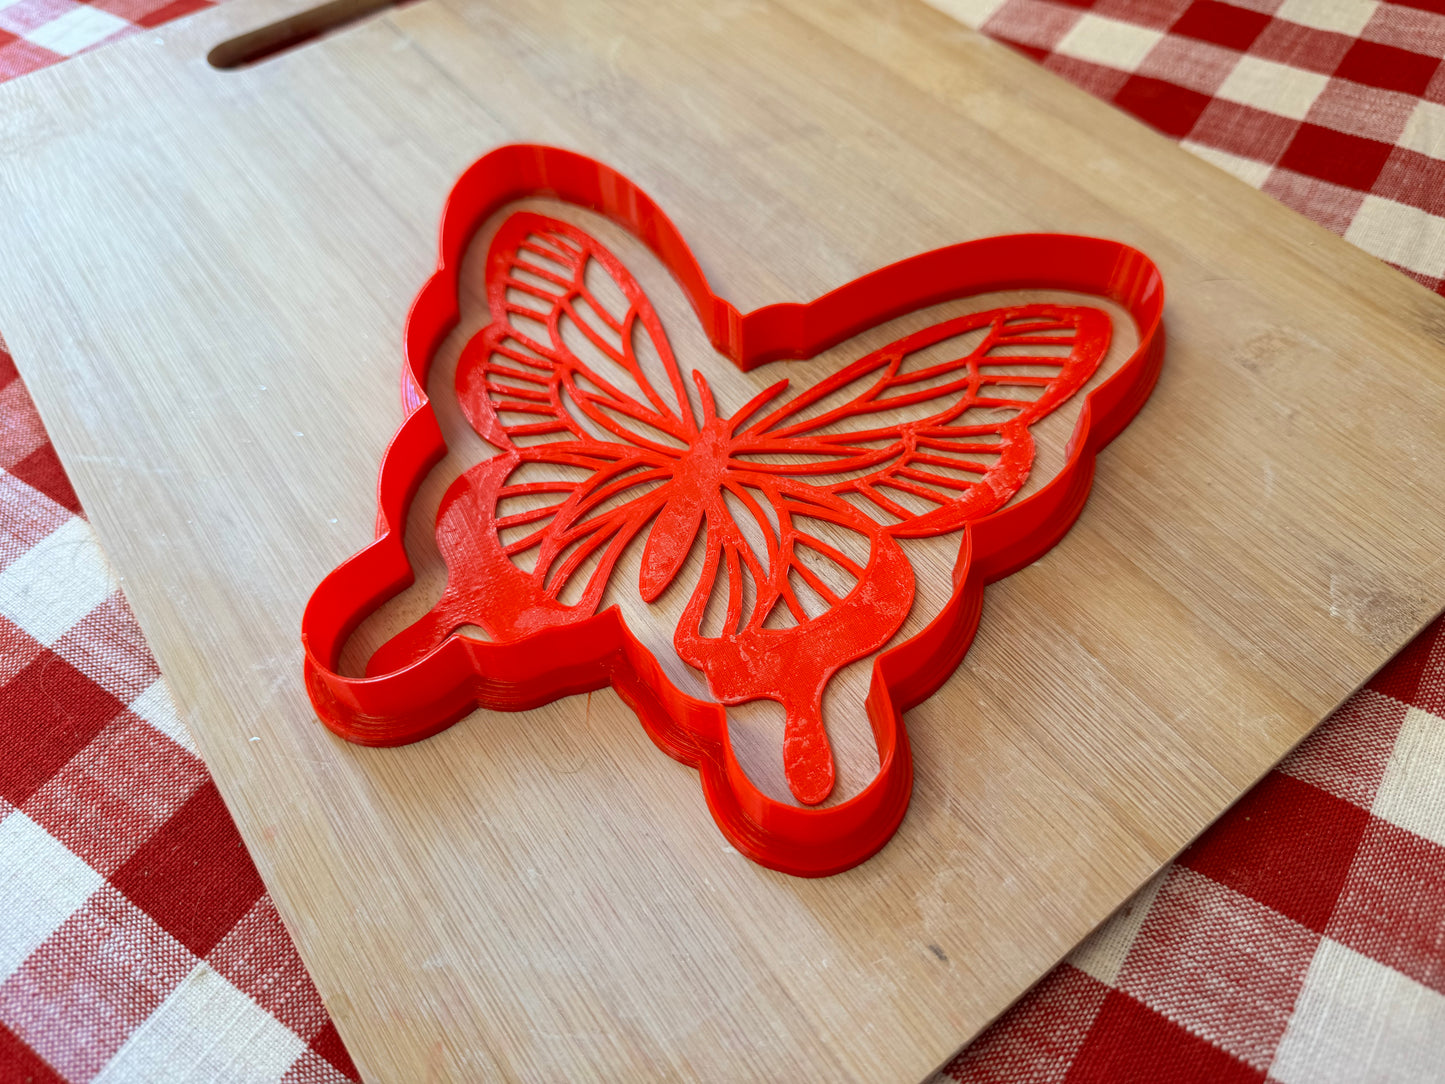 Butterfly design, pottery stamp or stencil w/ optional cutter - plastic 3D printed, multiple sizes